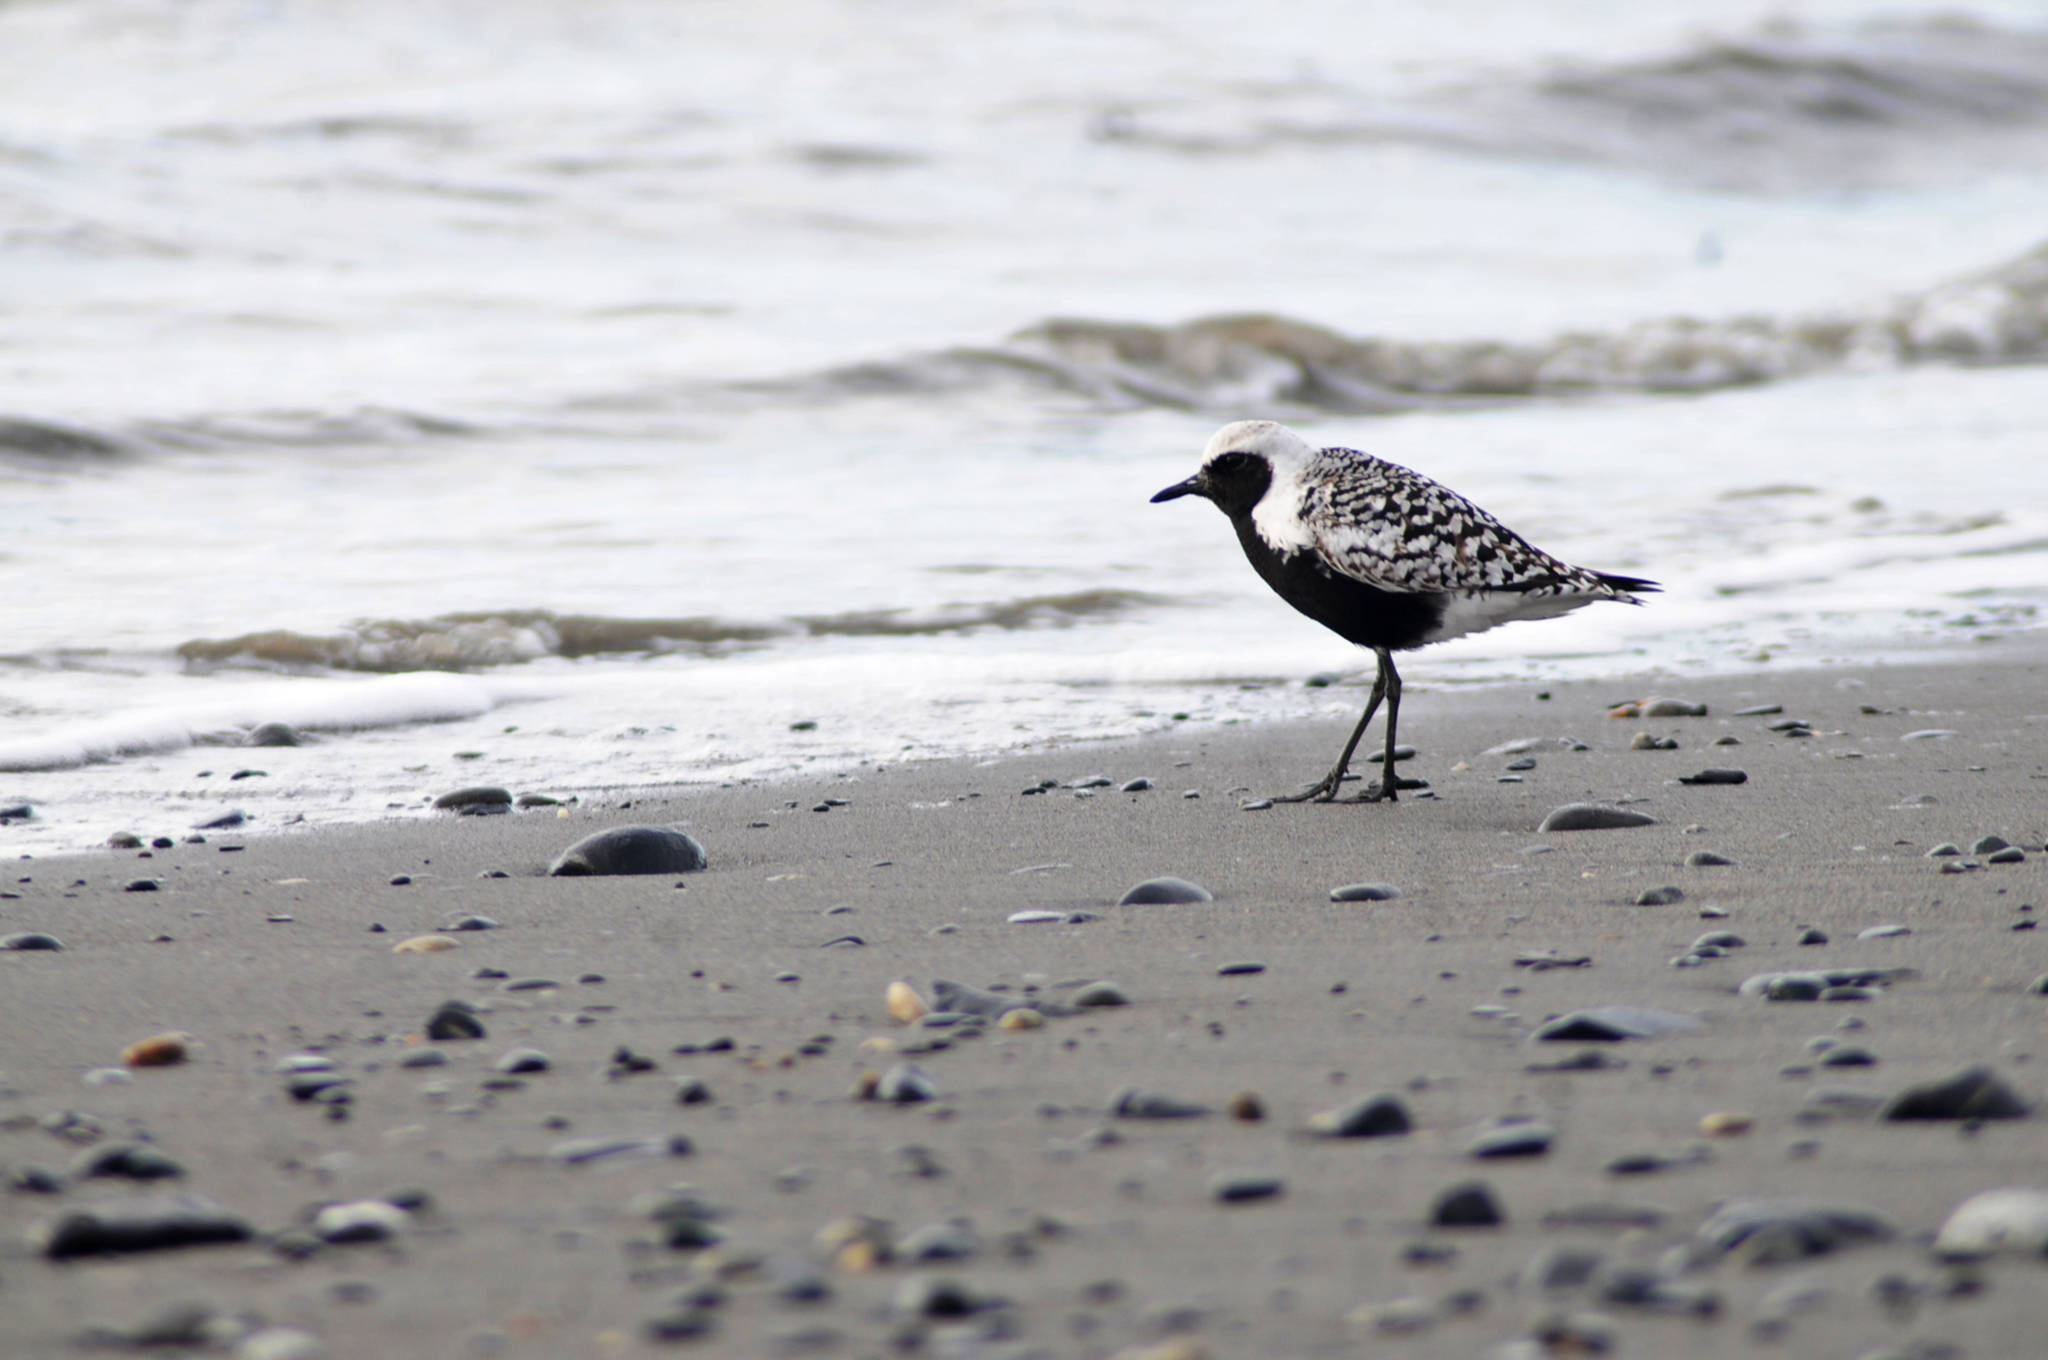 In this April 2017 photo, a black-bellied plover wanders the beach north of the Kasilof River near Kasilof, Alaska. The Kasilof River area is considered important habitat for shorebirds. (Photo by Elizabeth Earl/Peninsula Clarion, file)